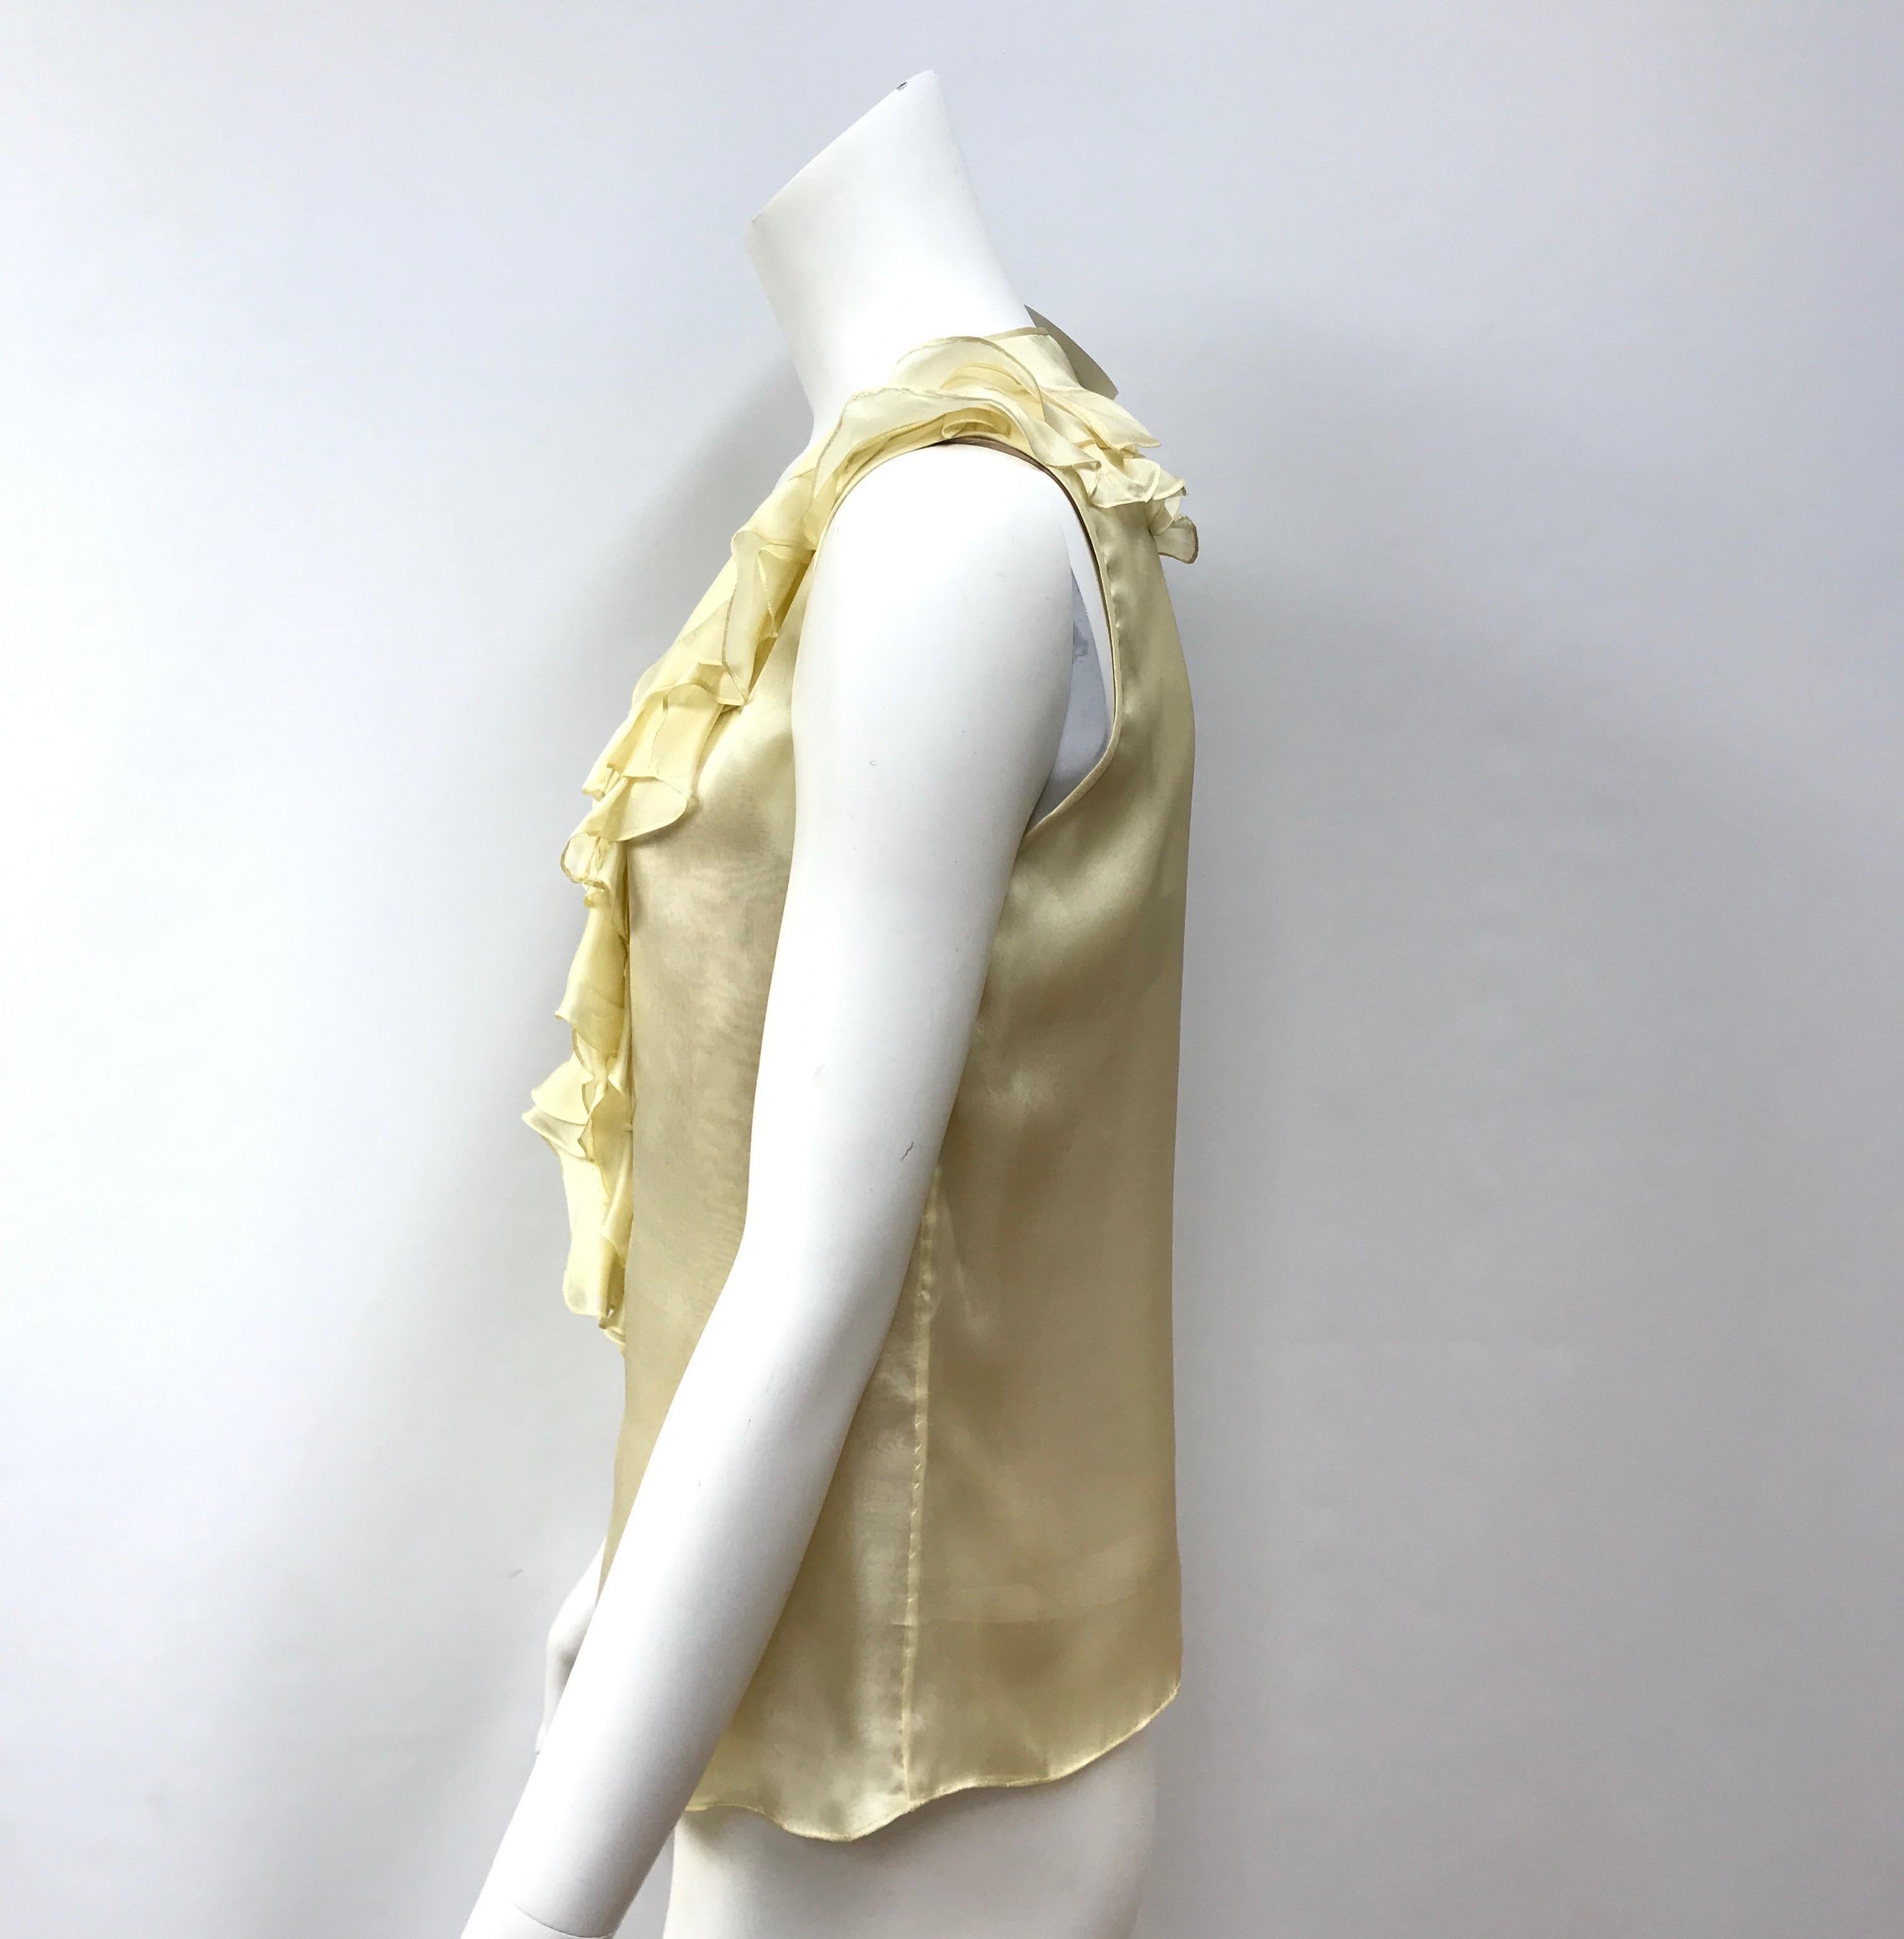 Oscar De La Renta Pale Yellow Silk Sleeveless Top-6. This Oscar De La Renta top is in excellent condition, it shows no sign of use. It is made of a light or pale yellow silk. It is sleeveless and has front ruffle detailing. There is a 